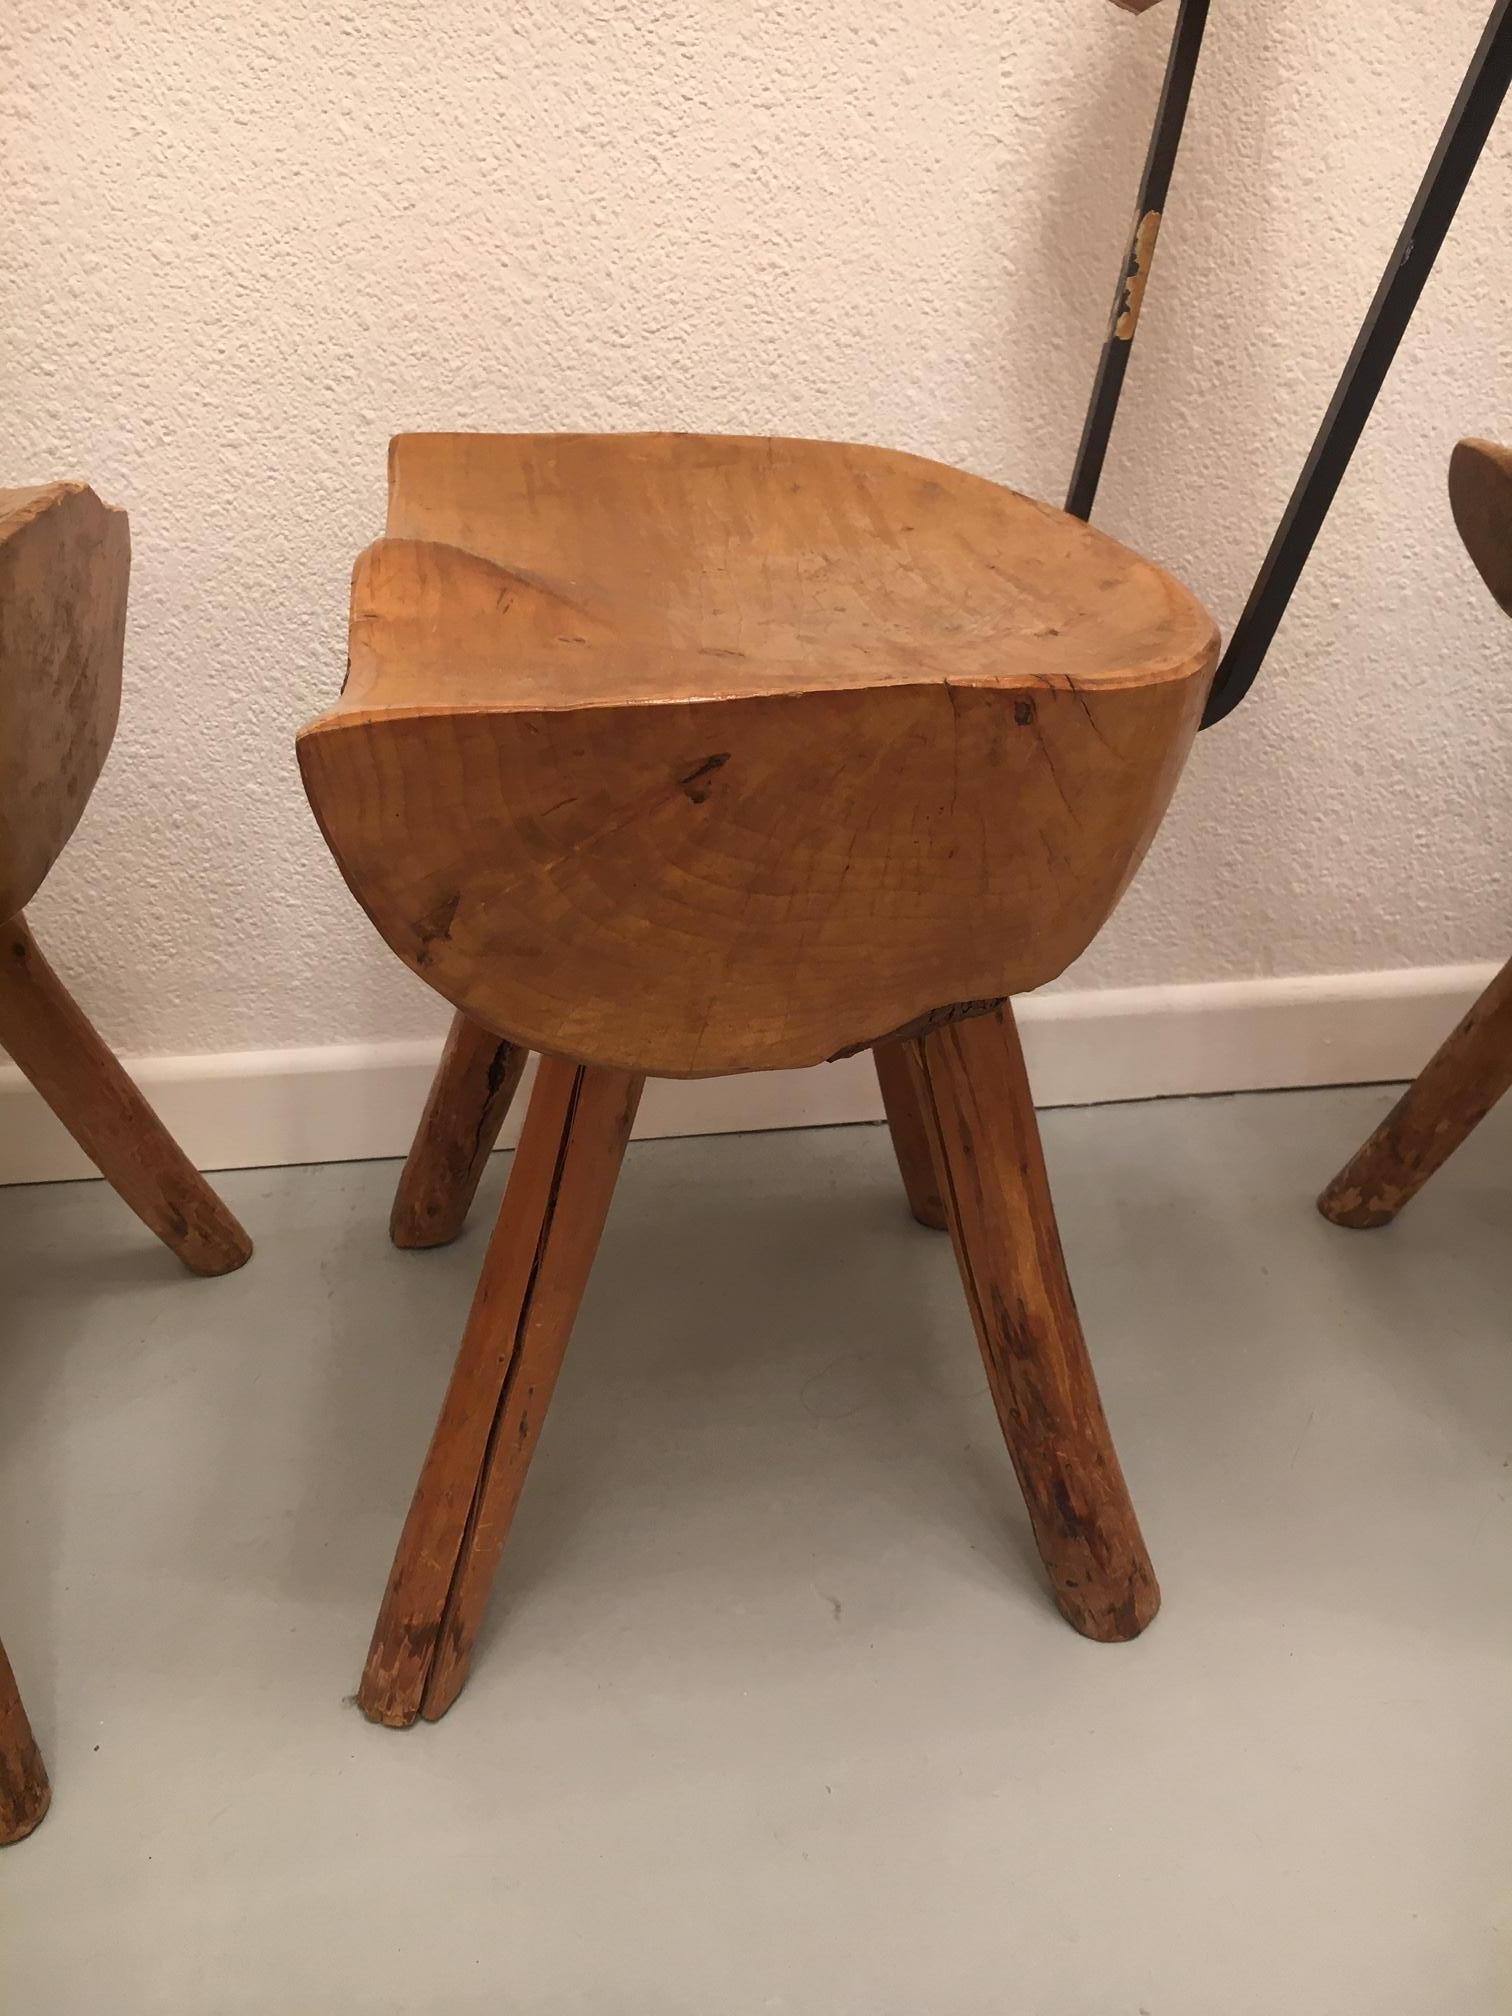 Set of 5 Solid Olive Wood Brutalist Rustic Dining Chairs, circa 1950s For Sale 12